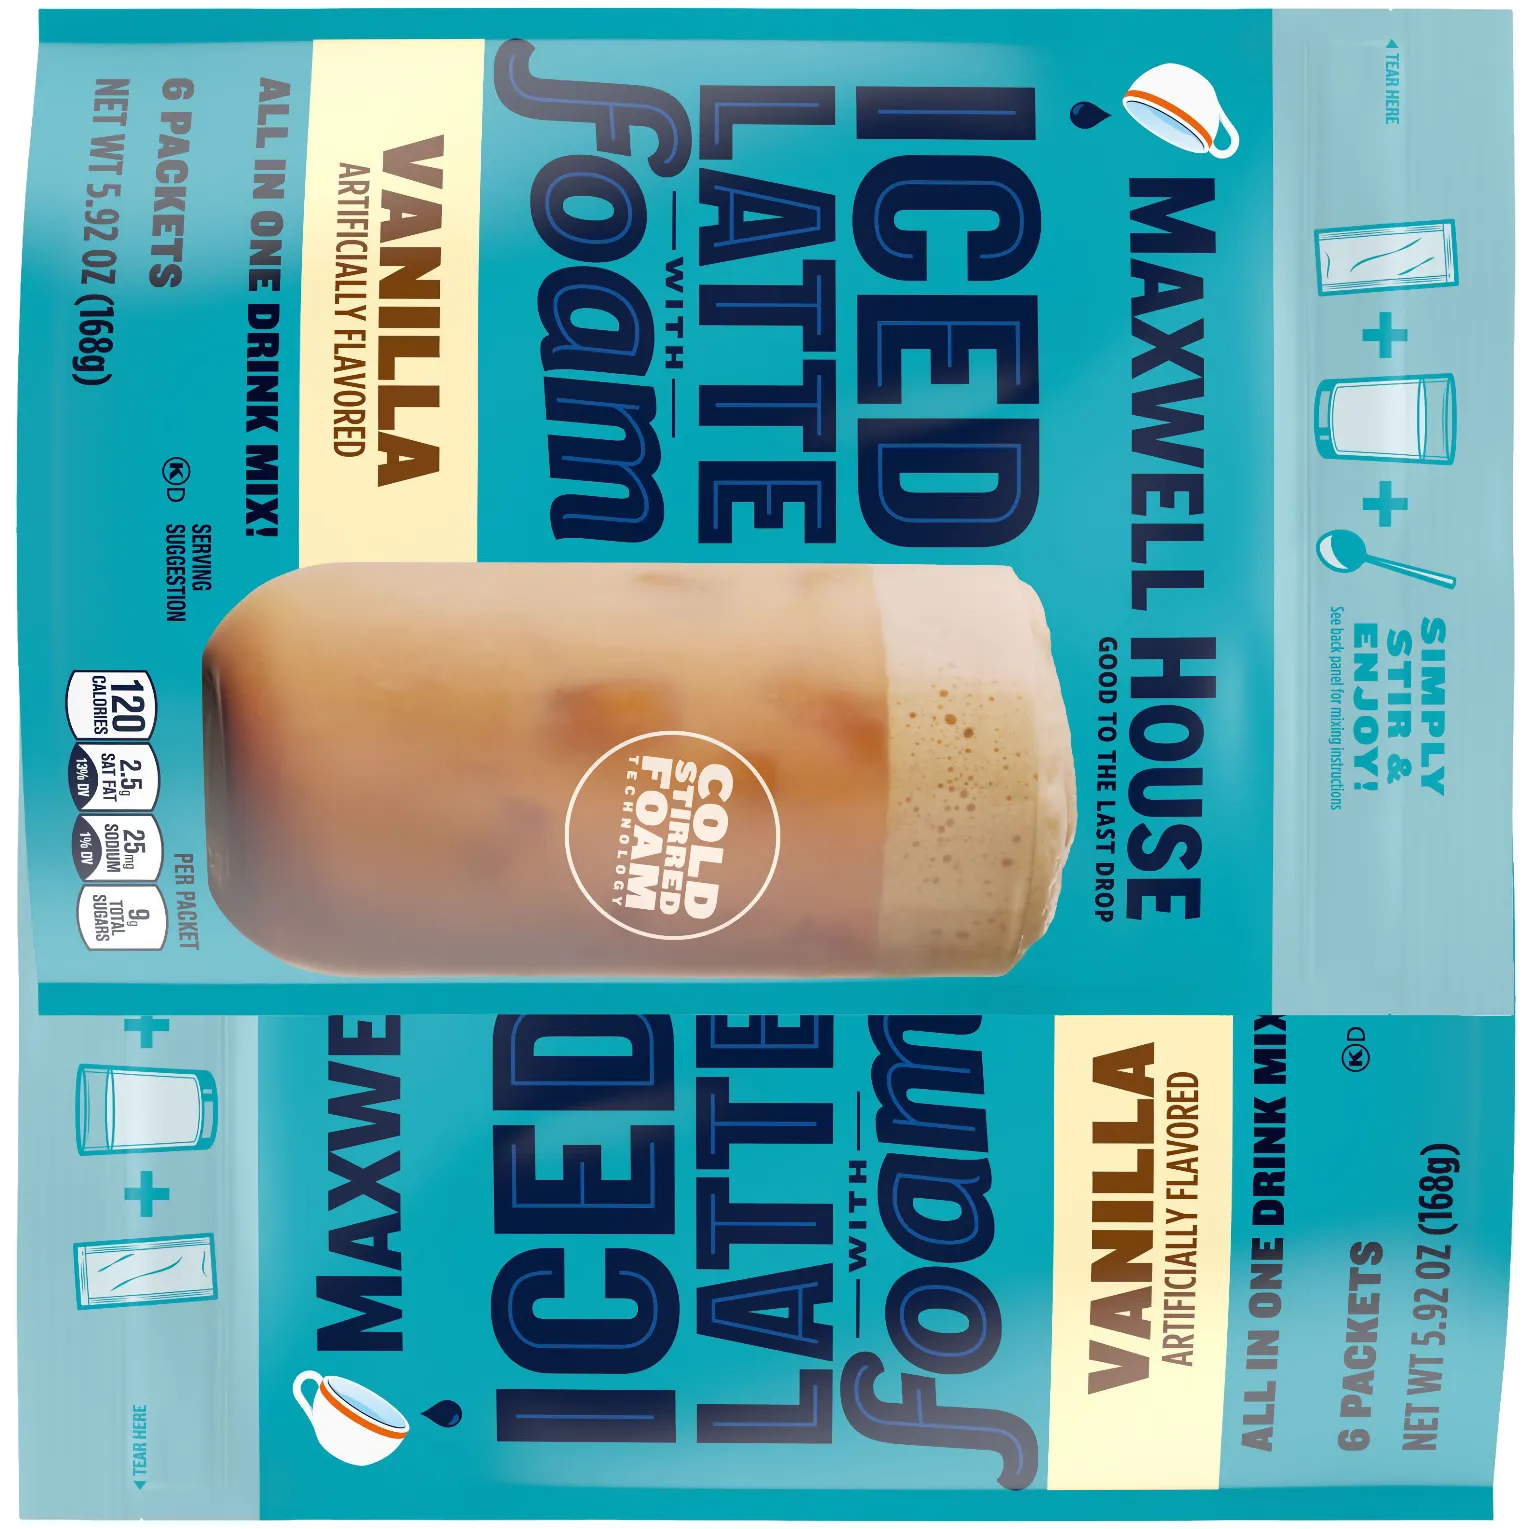 Free Maxwell House's Instant Iced Latte